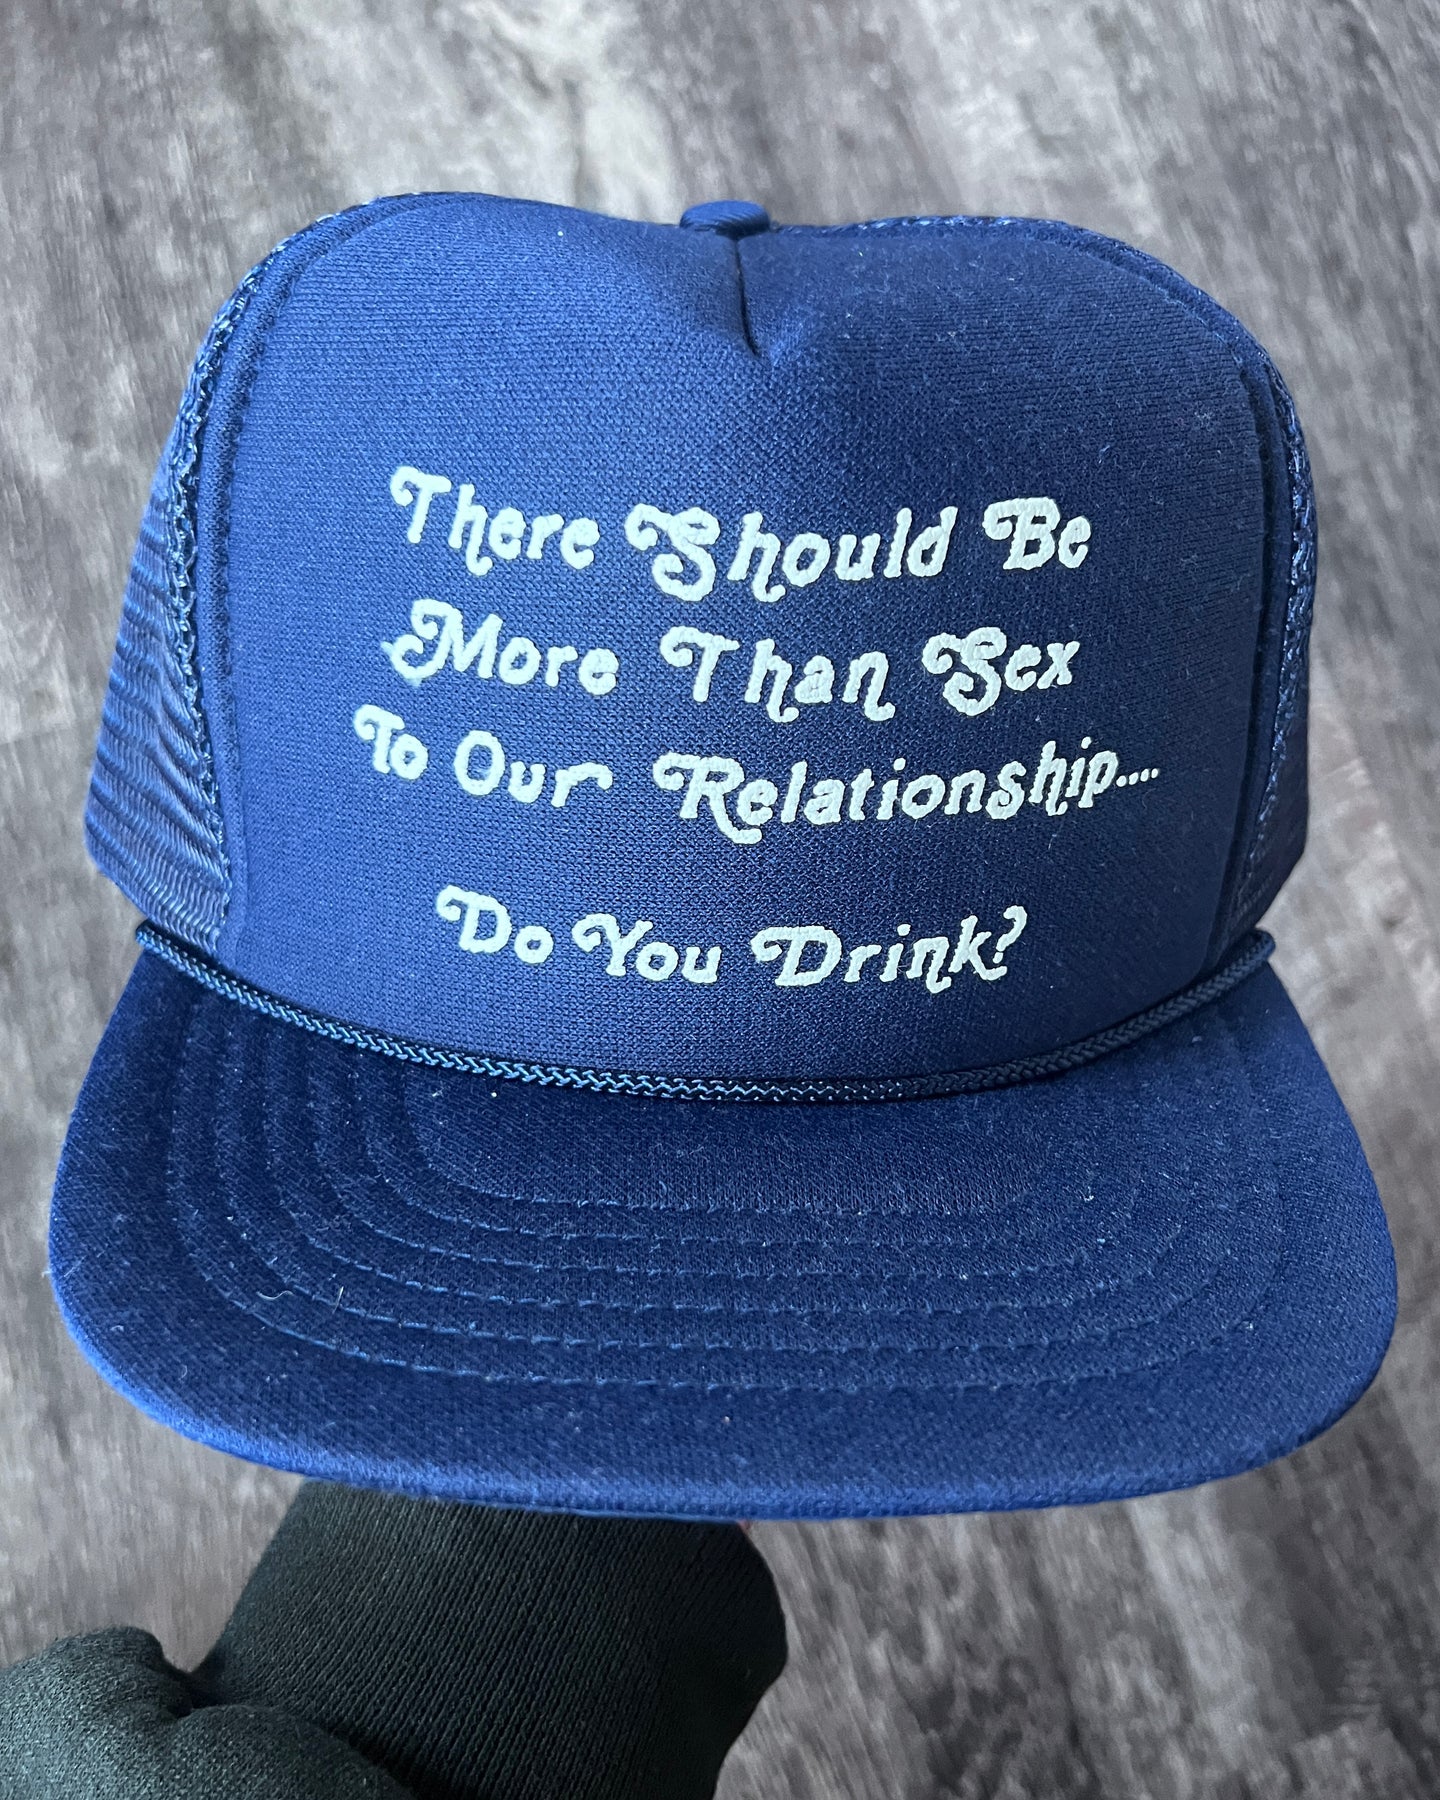 1980s Do You Drink Snapback Trucker Hat - One Size